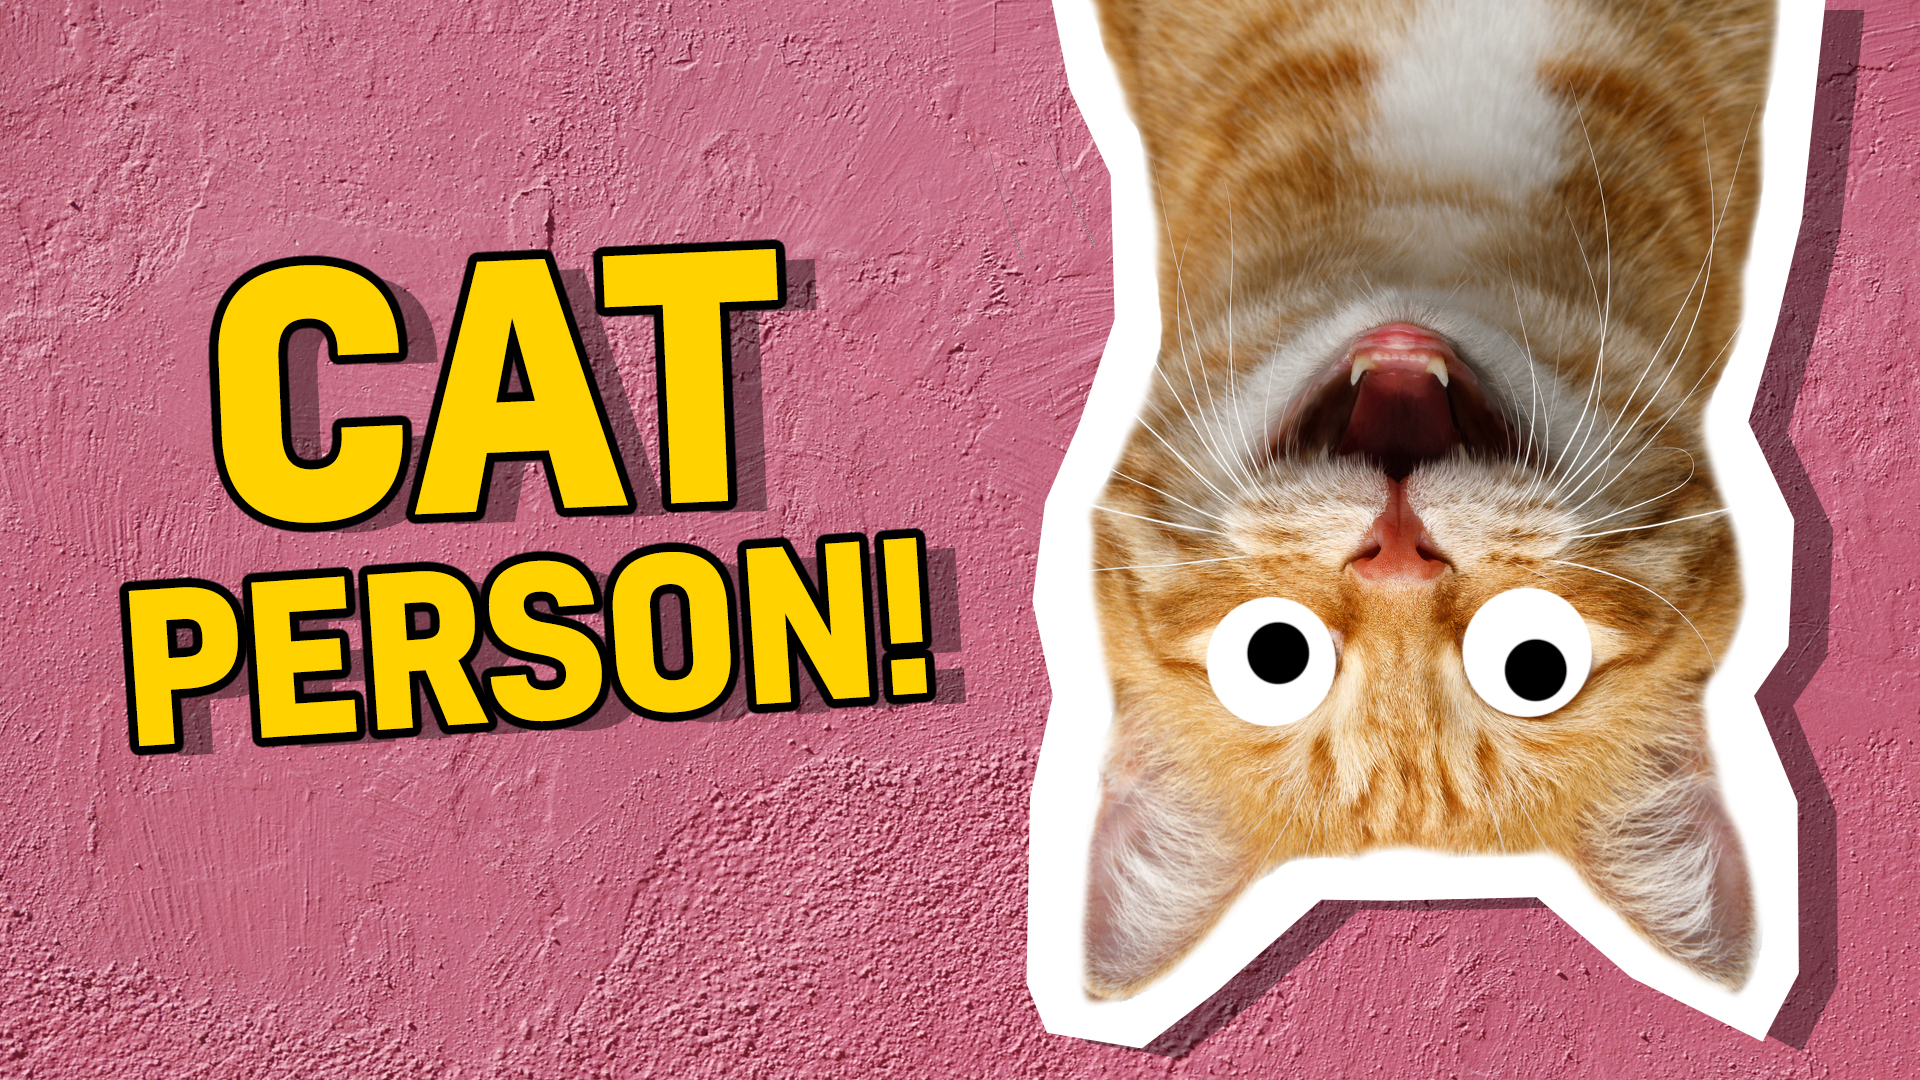 You're a: CAT PERSON!